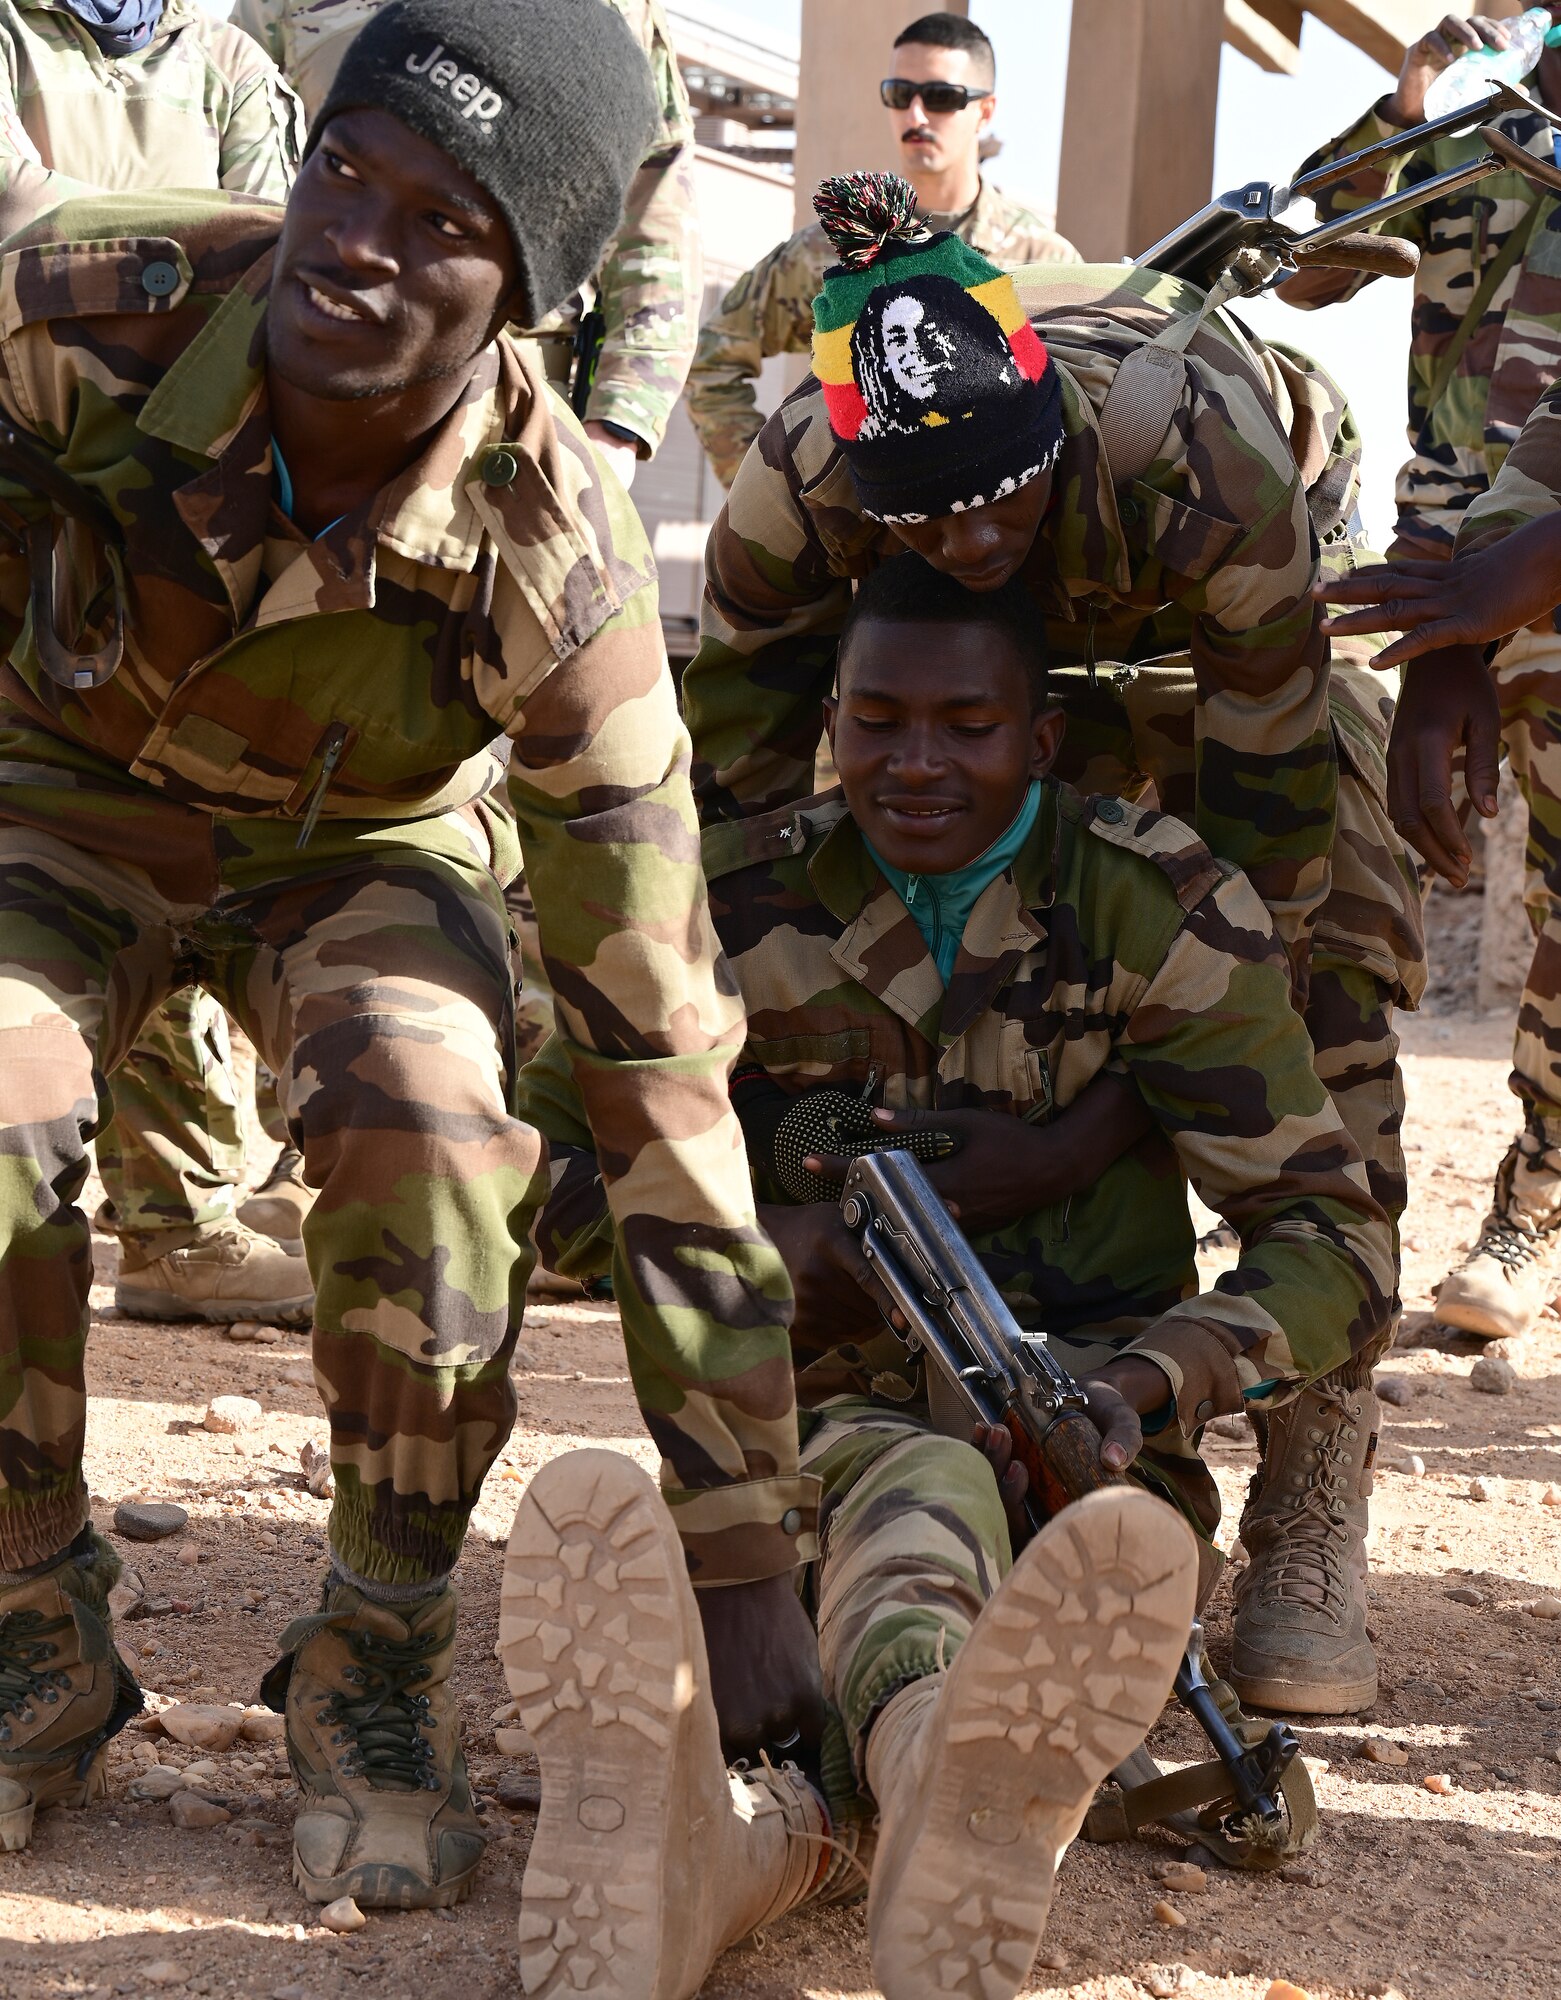 Three Nigerien Armed Forces (French language: Forces Armées Nigeriennes) members, practice a tactical carry taught to them by the 409th Expeditionary Security Forces Squadron air advisors and 724th Expeditionary Air Base Squadron firefighters  at Nigerien Air Base 201, Agadez, Niger, Jan. 21, 2022. The 409th ESFS hosted an eight-week course to train the FAN on various tactics such as combat lifesaving skills, weapon maneuvers, vehicle searches and patrol movements to enhance their ability to counter escalating violent extremism in the tri-border region of Niger, Burkina Faso, and Mali (U.S. Air Force photo by Tech. Sgt. Stephanie Longoria)